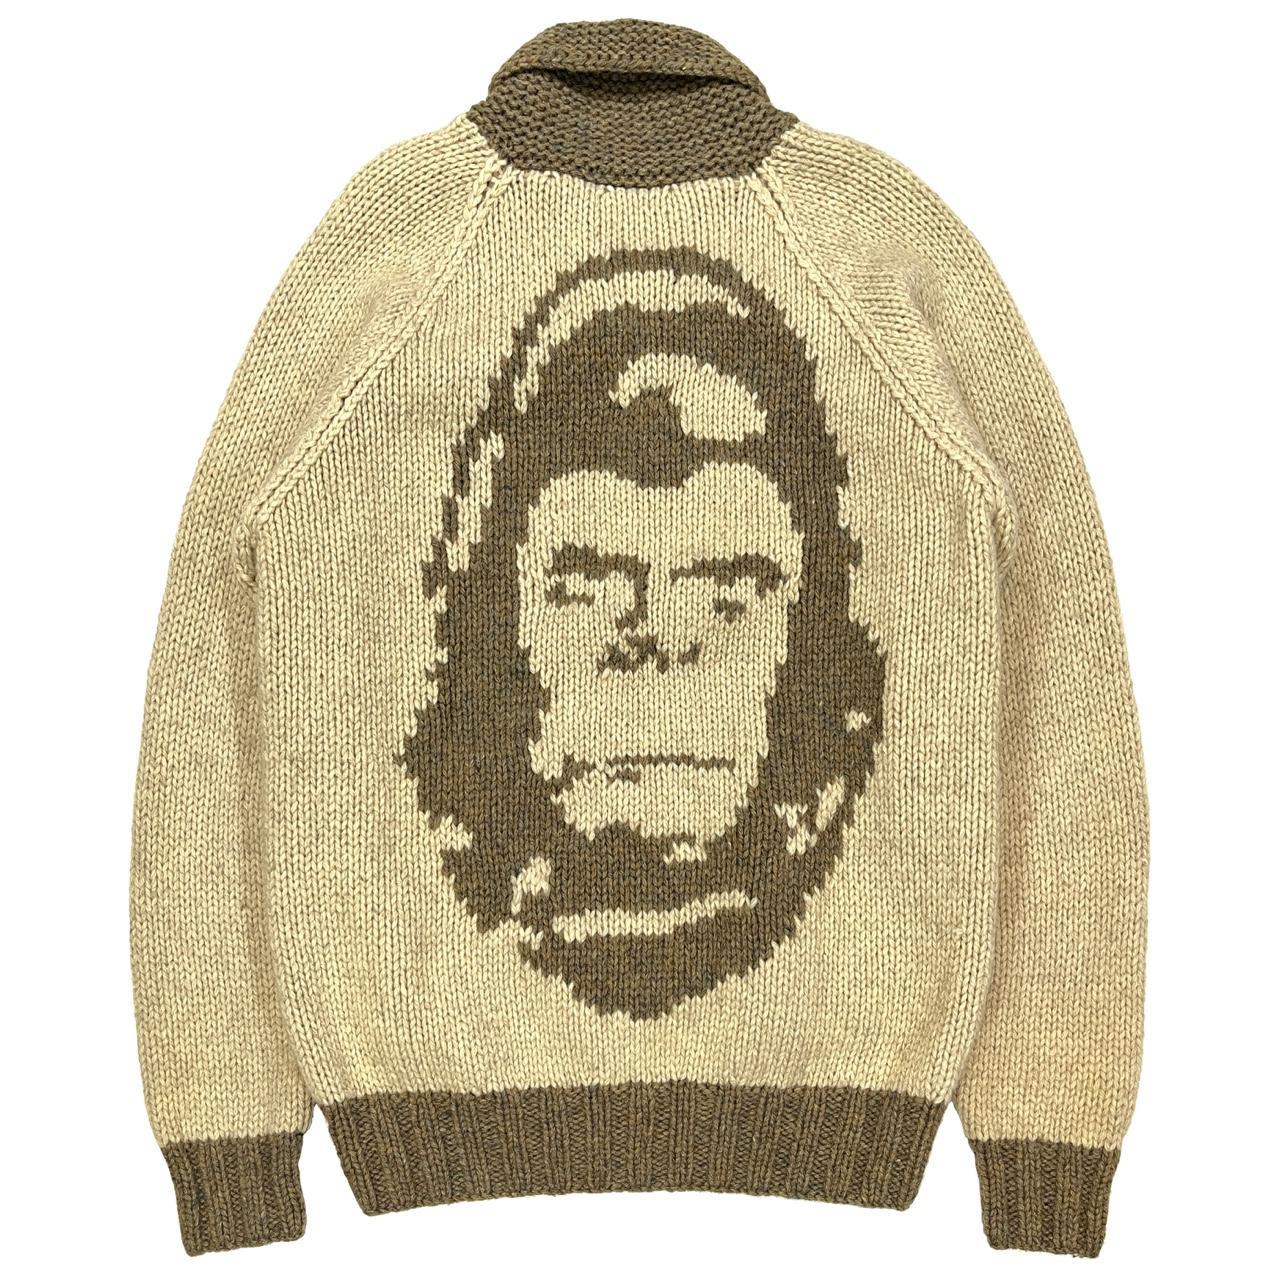 Planet Of The Apes 1997 Cowichan Sweater Knit...